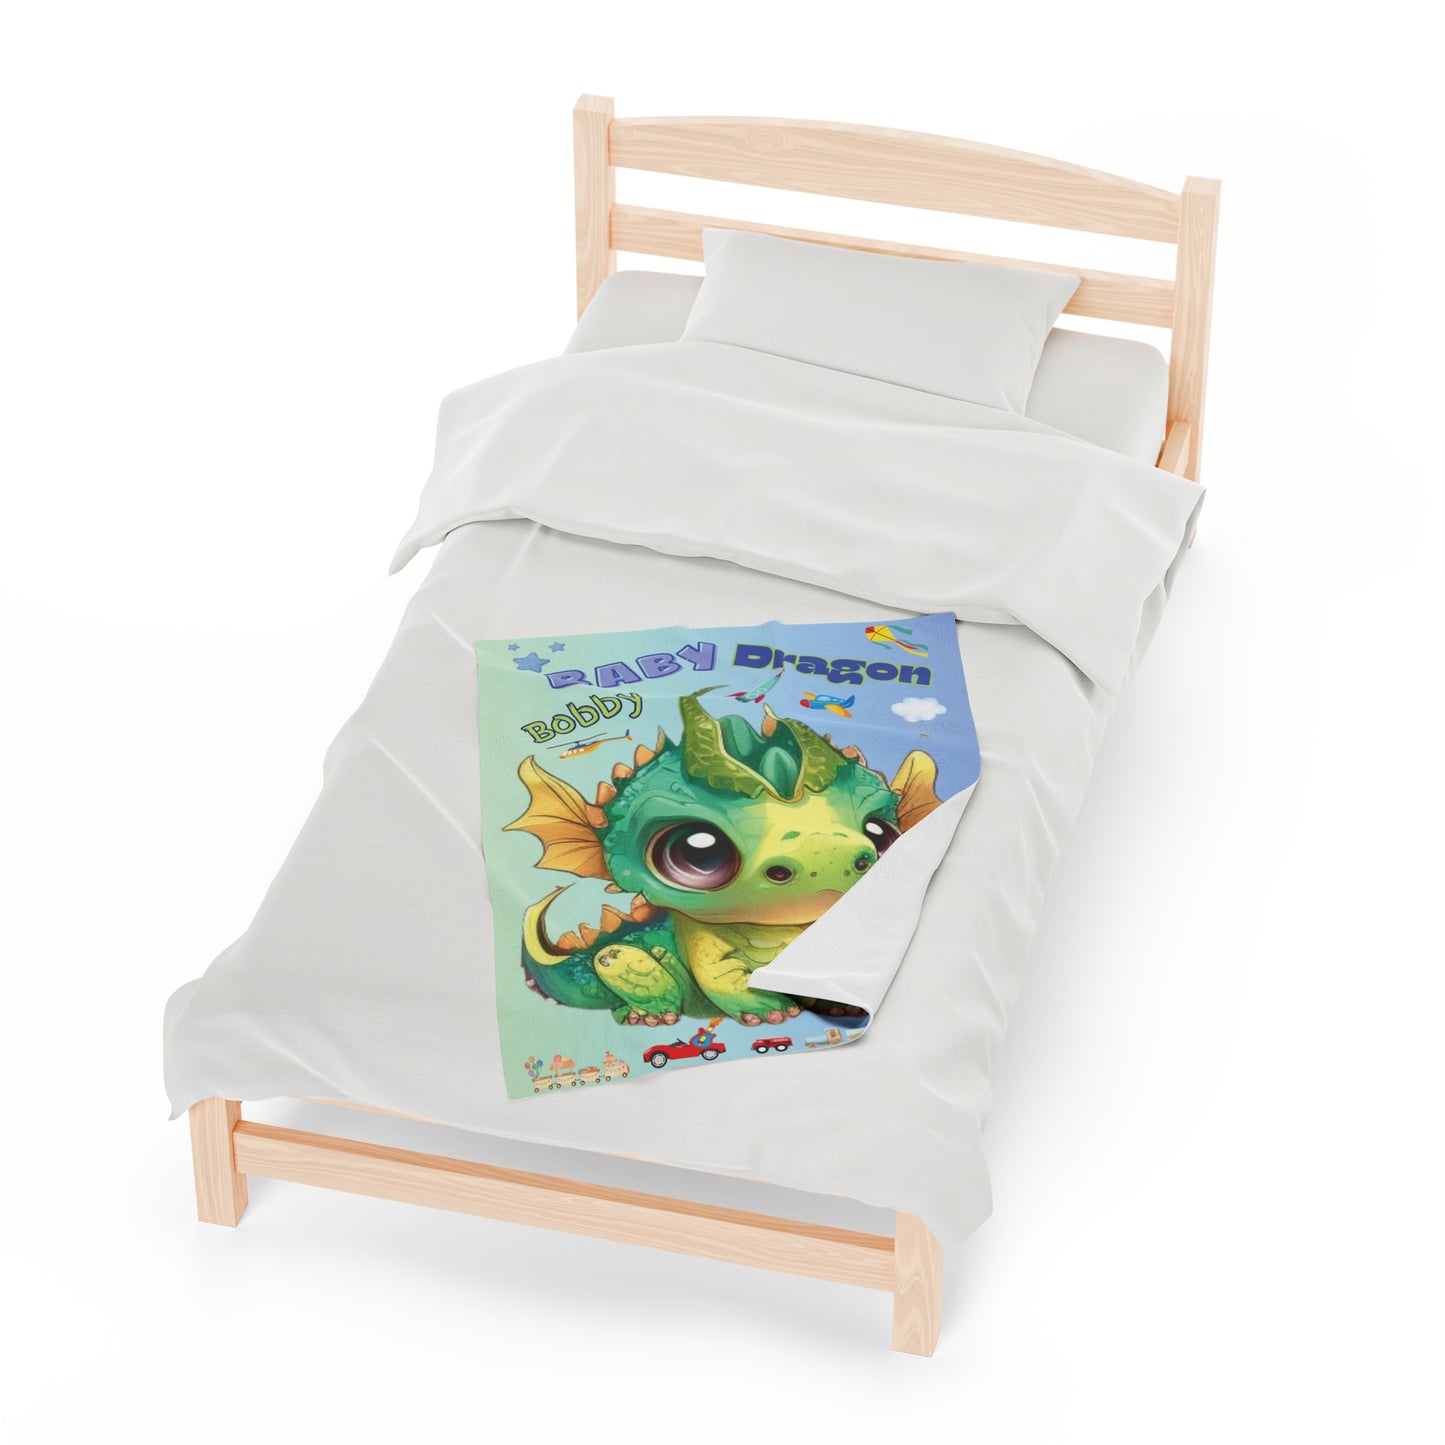 Our velveteen minky soft baby & kids blanket with a large green and gold adorable baby dragon Bobby in the center with boys toys all around, trains, trucks, dinosaurs, rocket ships and planes - the blanket color is gradient going from a beautiful light blue/green to a light blue every little boy will love